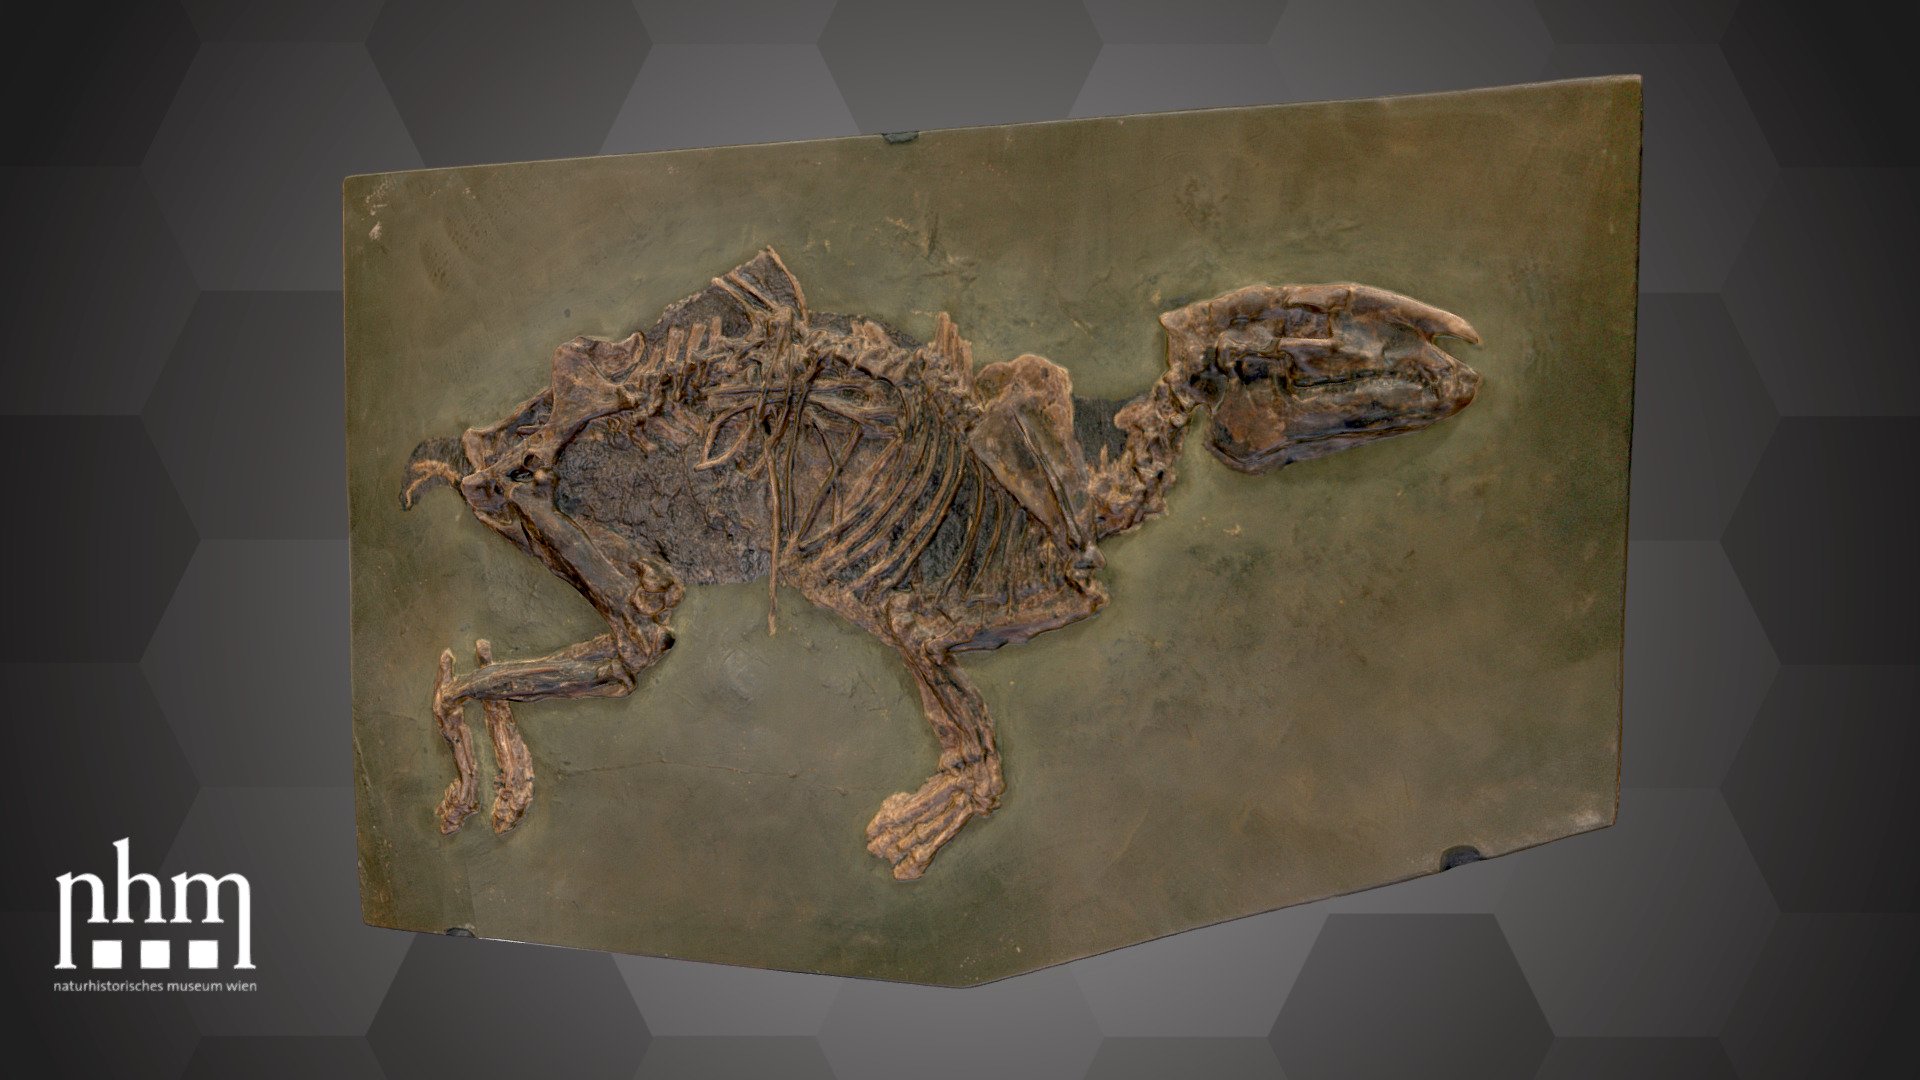 3D scan of a primeval dwarf horse (Eurohippus messelensis) fossil from Messel, which is todays Darmstadt, Germany. Fossils from this area are extraordinarily good preserved. That is because 47 million years ago there was a tropical forest around Lake Messel, and on its floor the oxygen-deprived environment prevented decomposition of the corpses that sunk into the lake.

This primeval dwarf horse of Messel is Number 28 of the NHM Top 100 and can be found in Hall 9 in Showcase 68 at the NHM Vienna.

Specimen: Eurohippus messelensis (Haupt, 1925) 

Inventory Number: NHMW-Geo 1993/0035/0001

Collection: Natural History Museum Vienna, Geology &amp; Paleontology Dept., Vetrebrate Coll. (curator: Ursula Göhlich)

Find out more about the NHMW here.

Scanned and edited by Anna Haider &amp; Viola Winkler (NHMW)

Scanner: Artec Leo. Infrastructure funded by the FFG 3d model